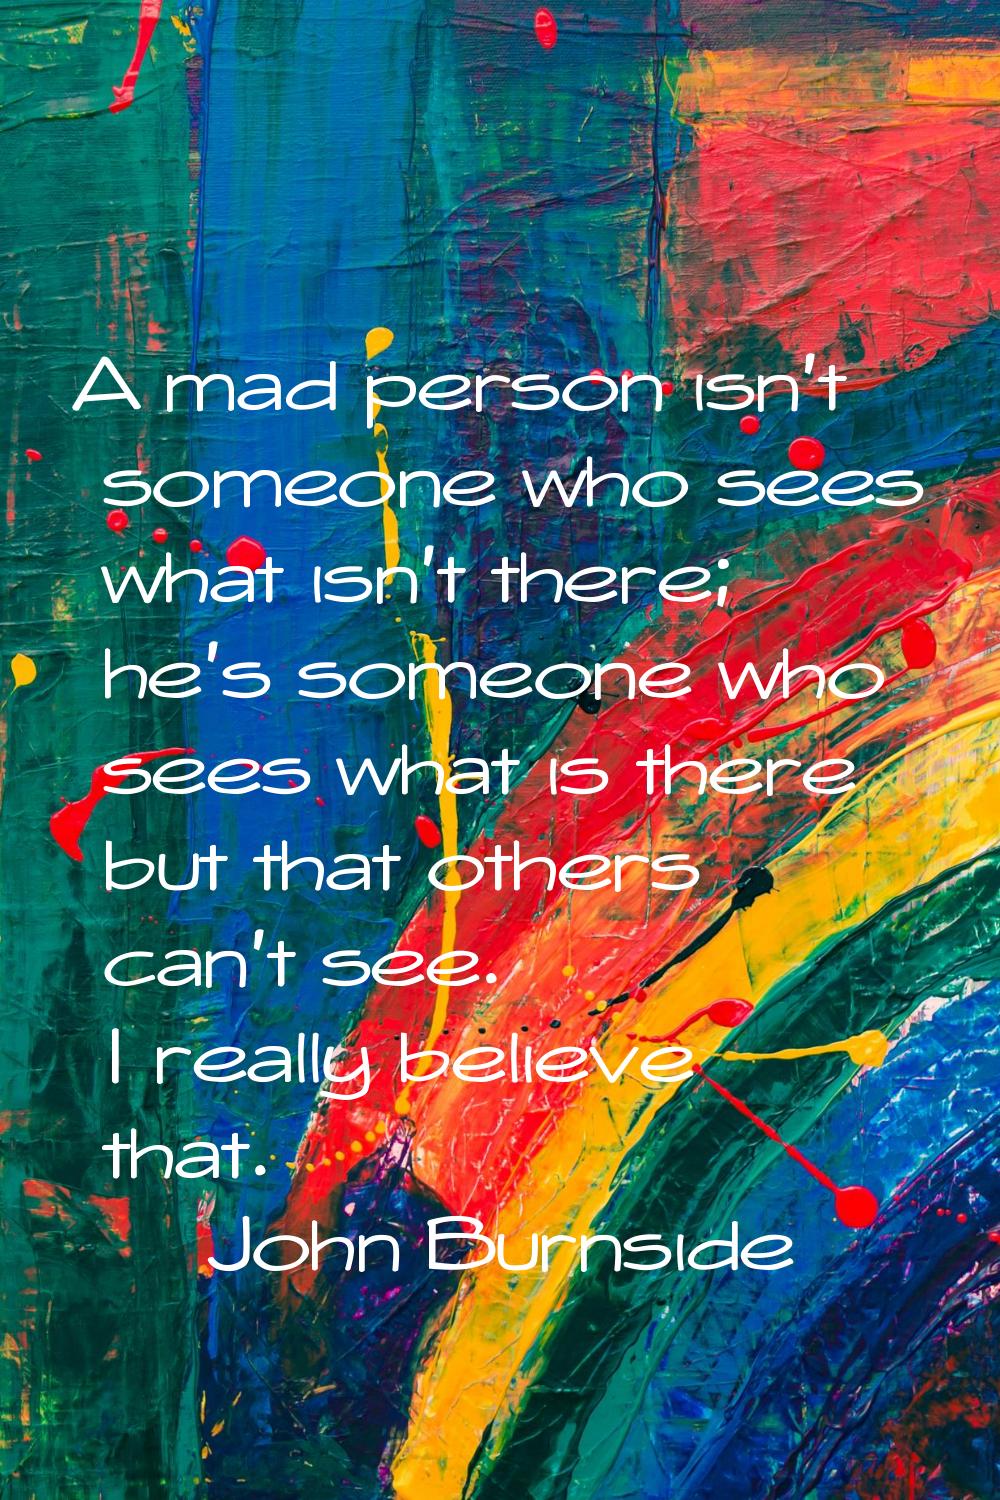 A mad person isn't someone who sees what isn't there; he's someone who sees what is there but that 